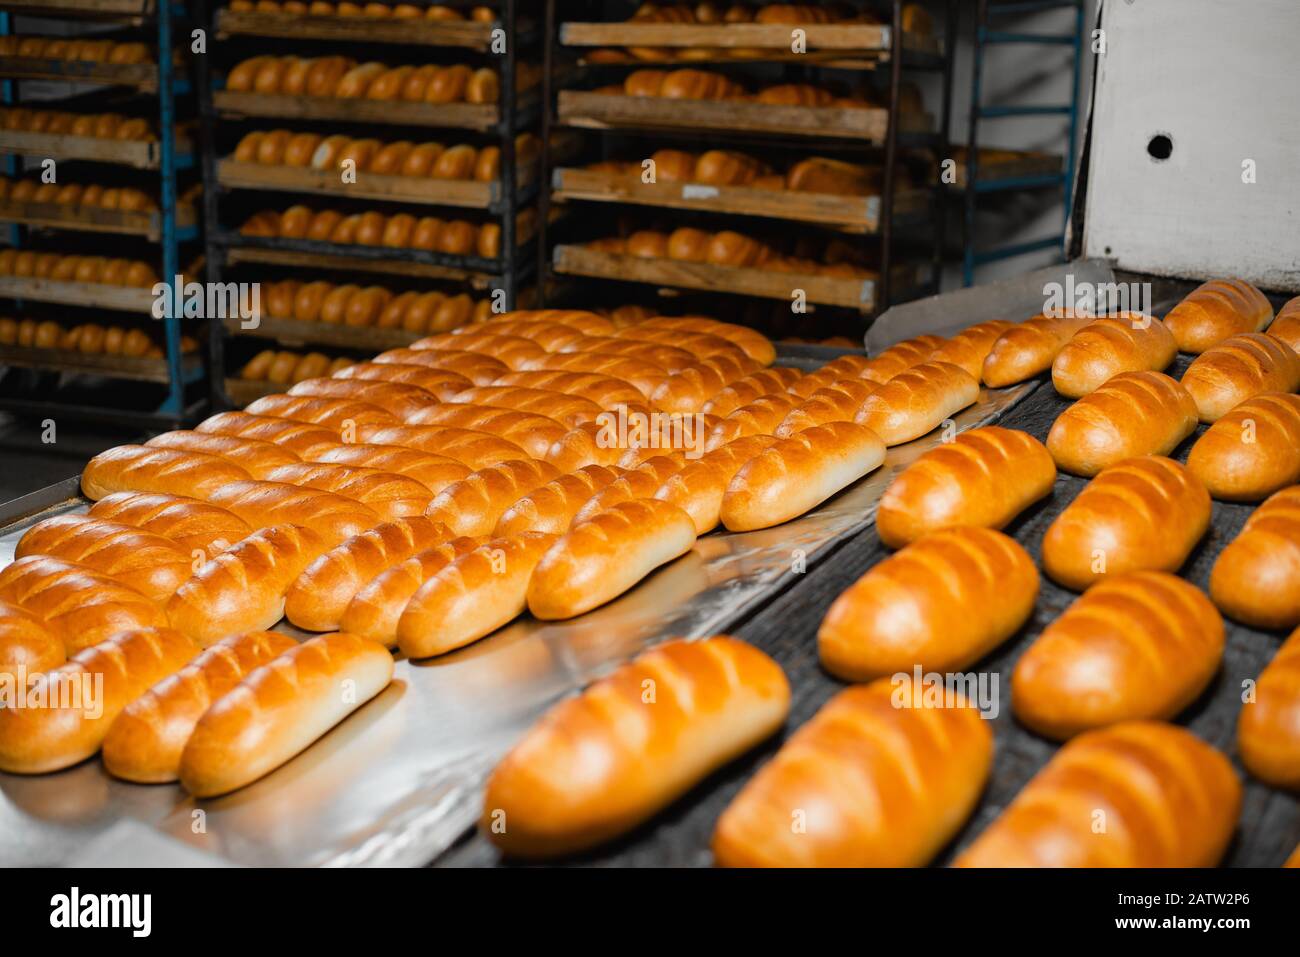 https://c8.alamy.com/comp/2ATW2P6/the-oven-in-the-bakery-hot-fresh-bread-leaves-the-industrial-oven-in-a-bakery-automatic-bread-production-line-2ATW2P6.jpg